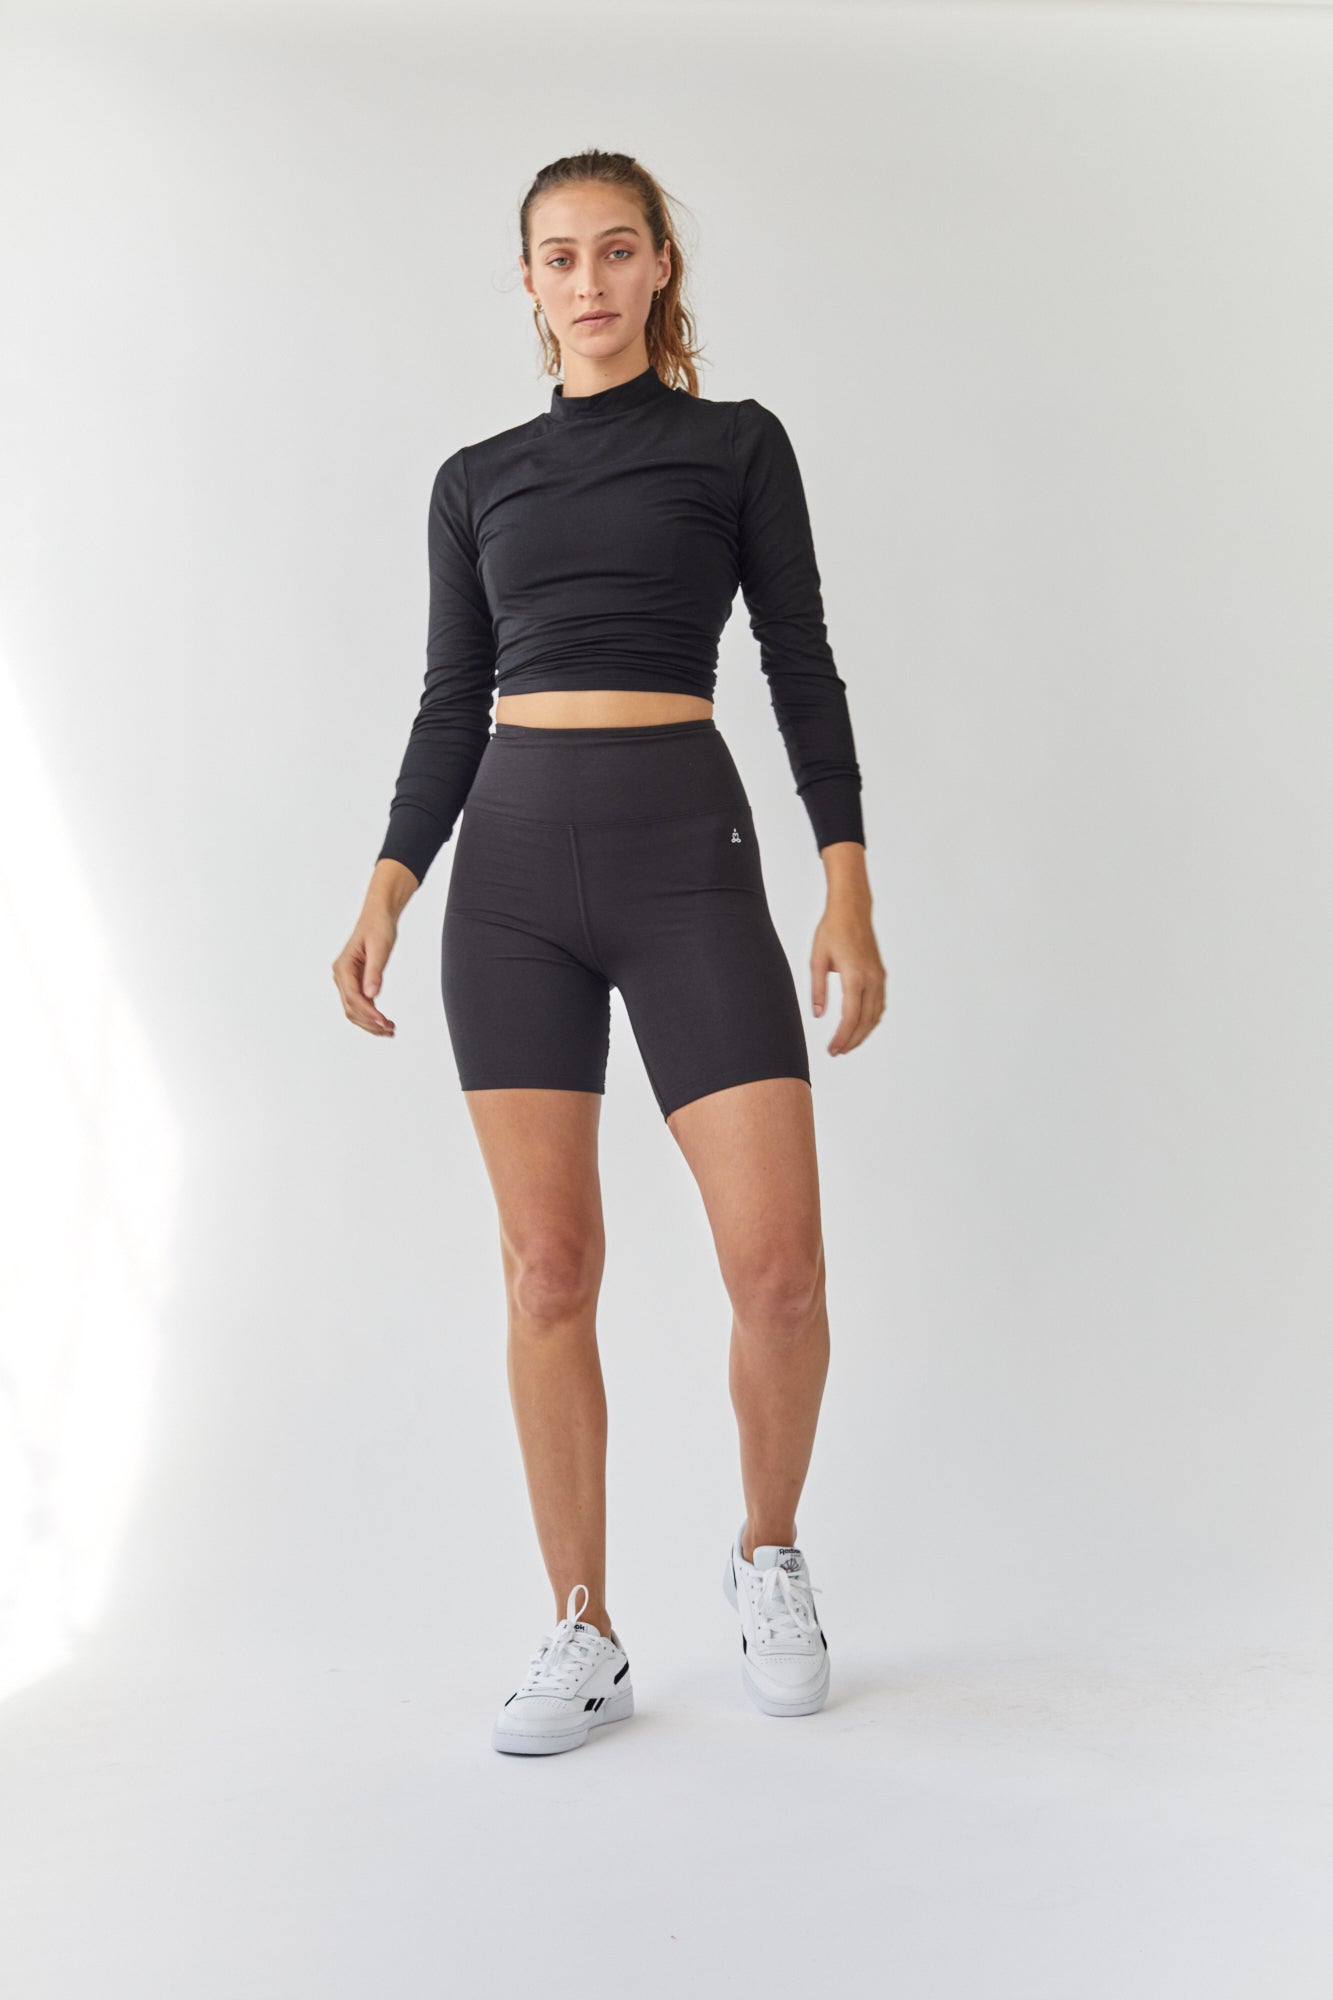 Ethically made activewear 